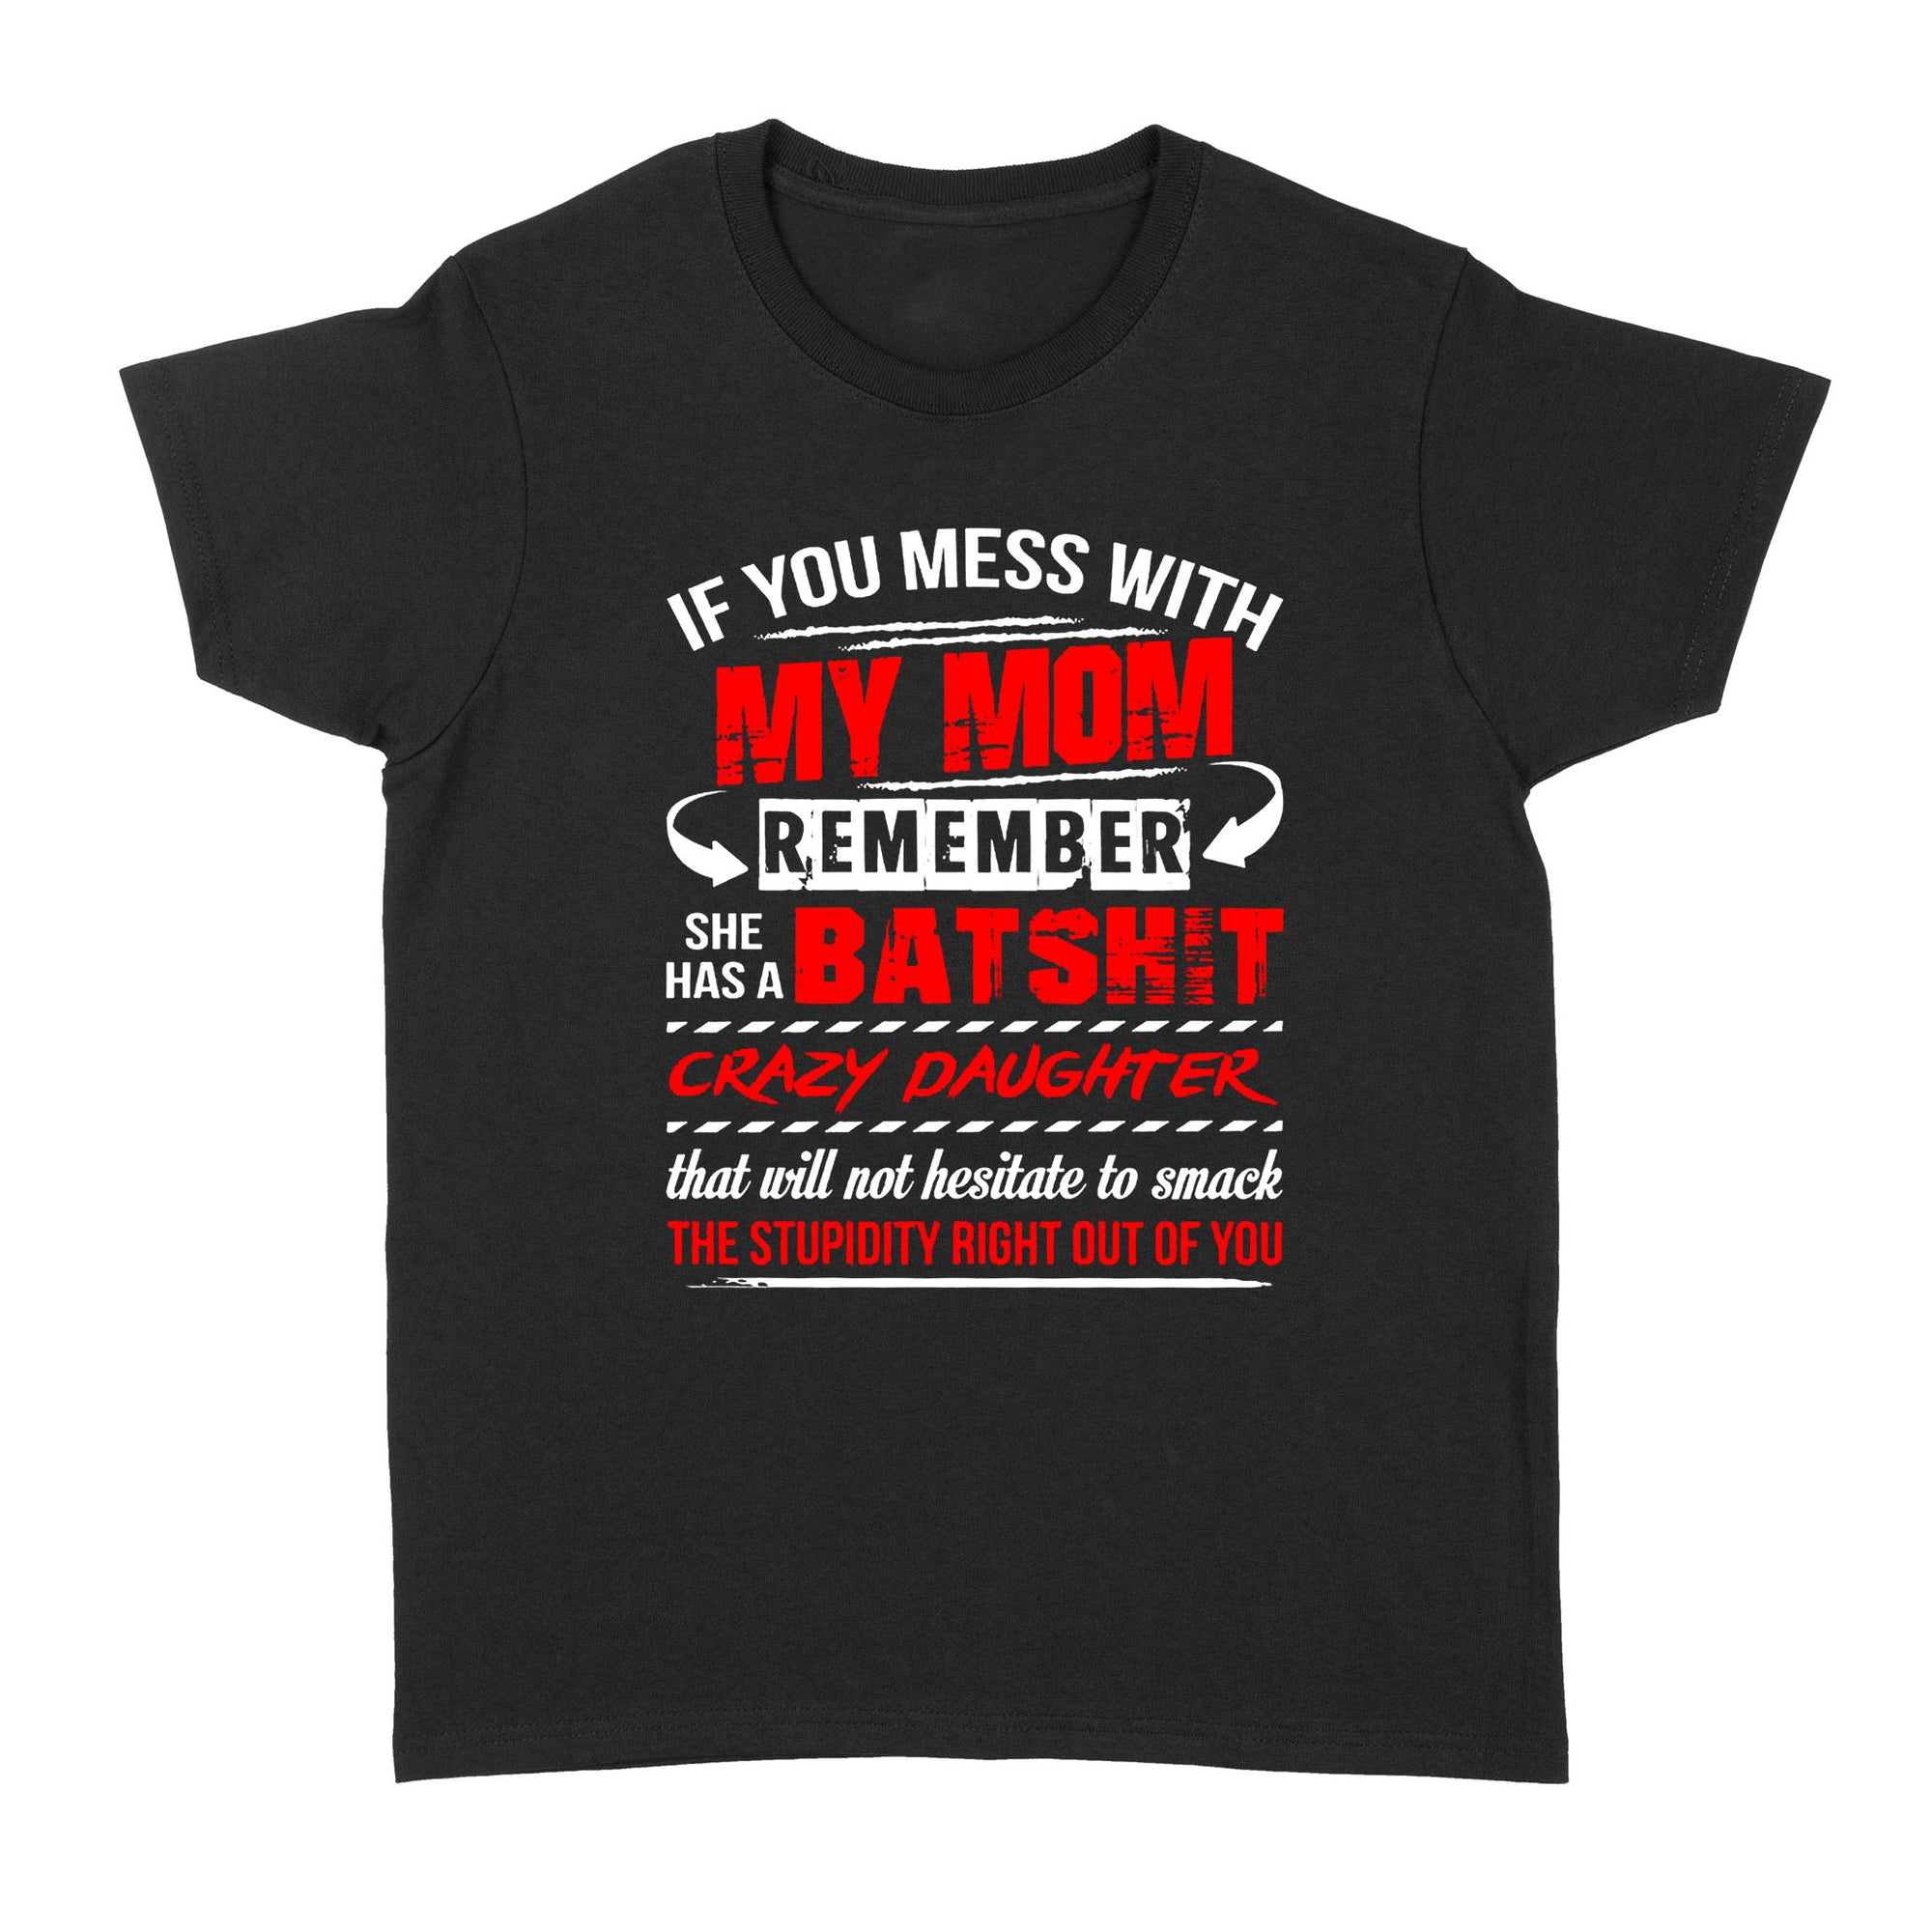 Gift Ideas for Daughter If you mess with my Mom remember she has a Batshit crazy daughter - Standard Women's T-shirt